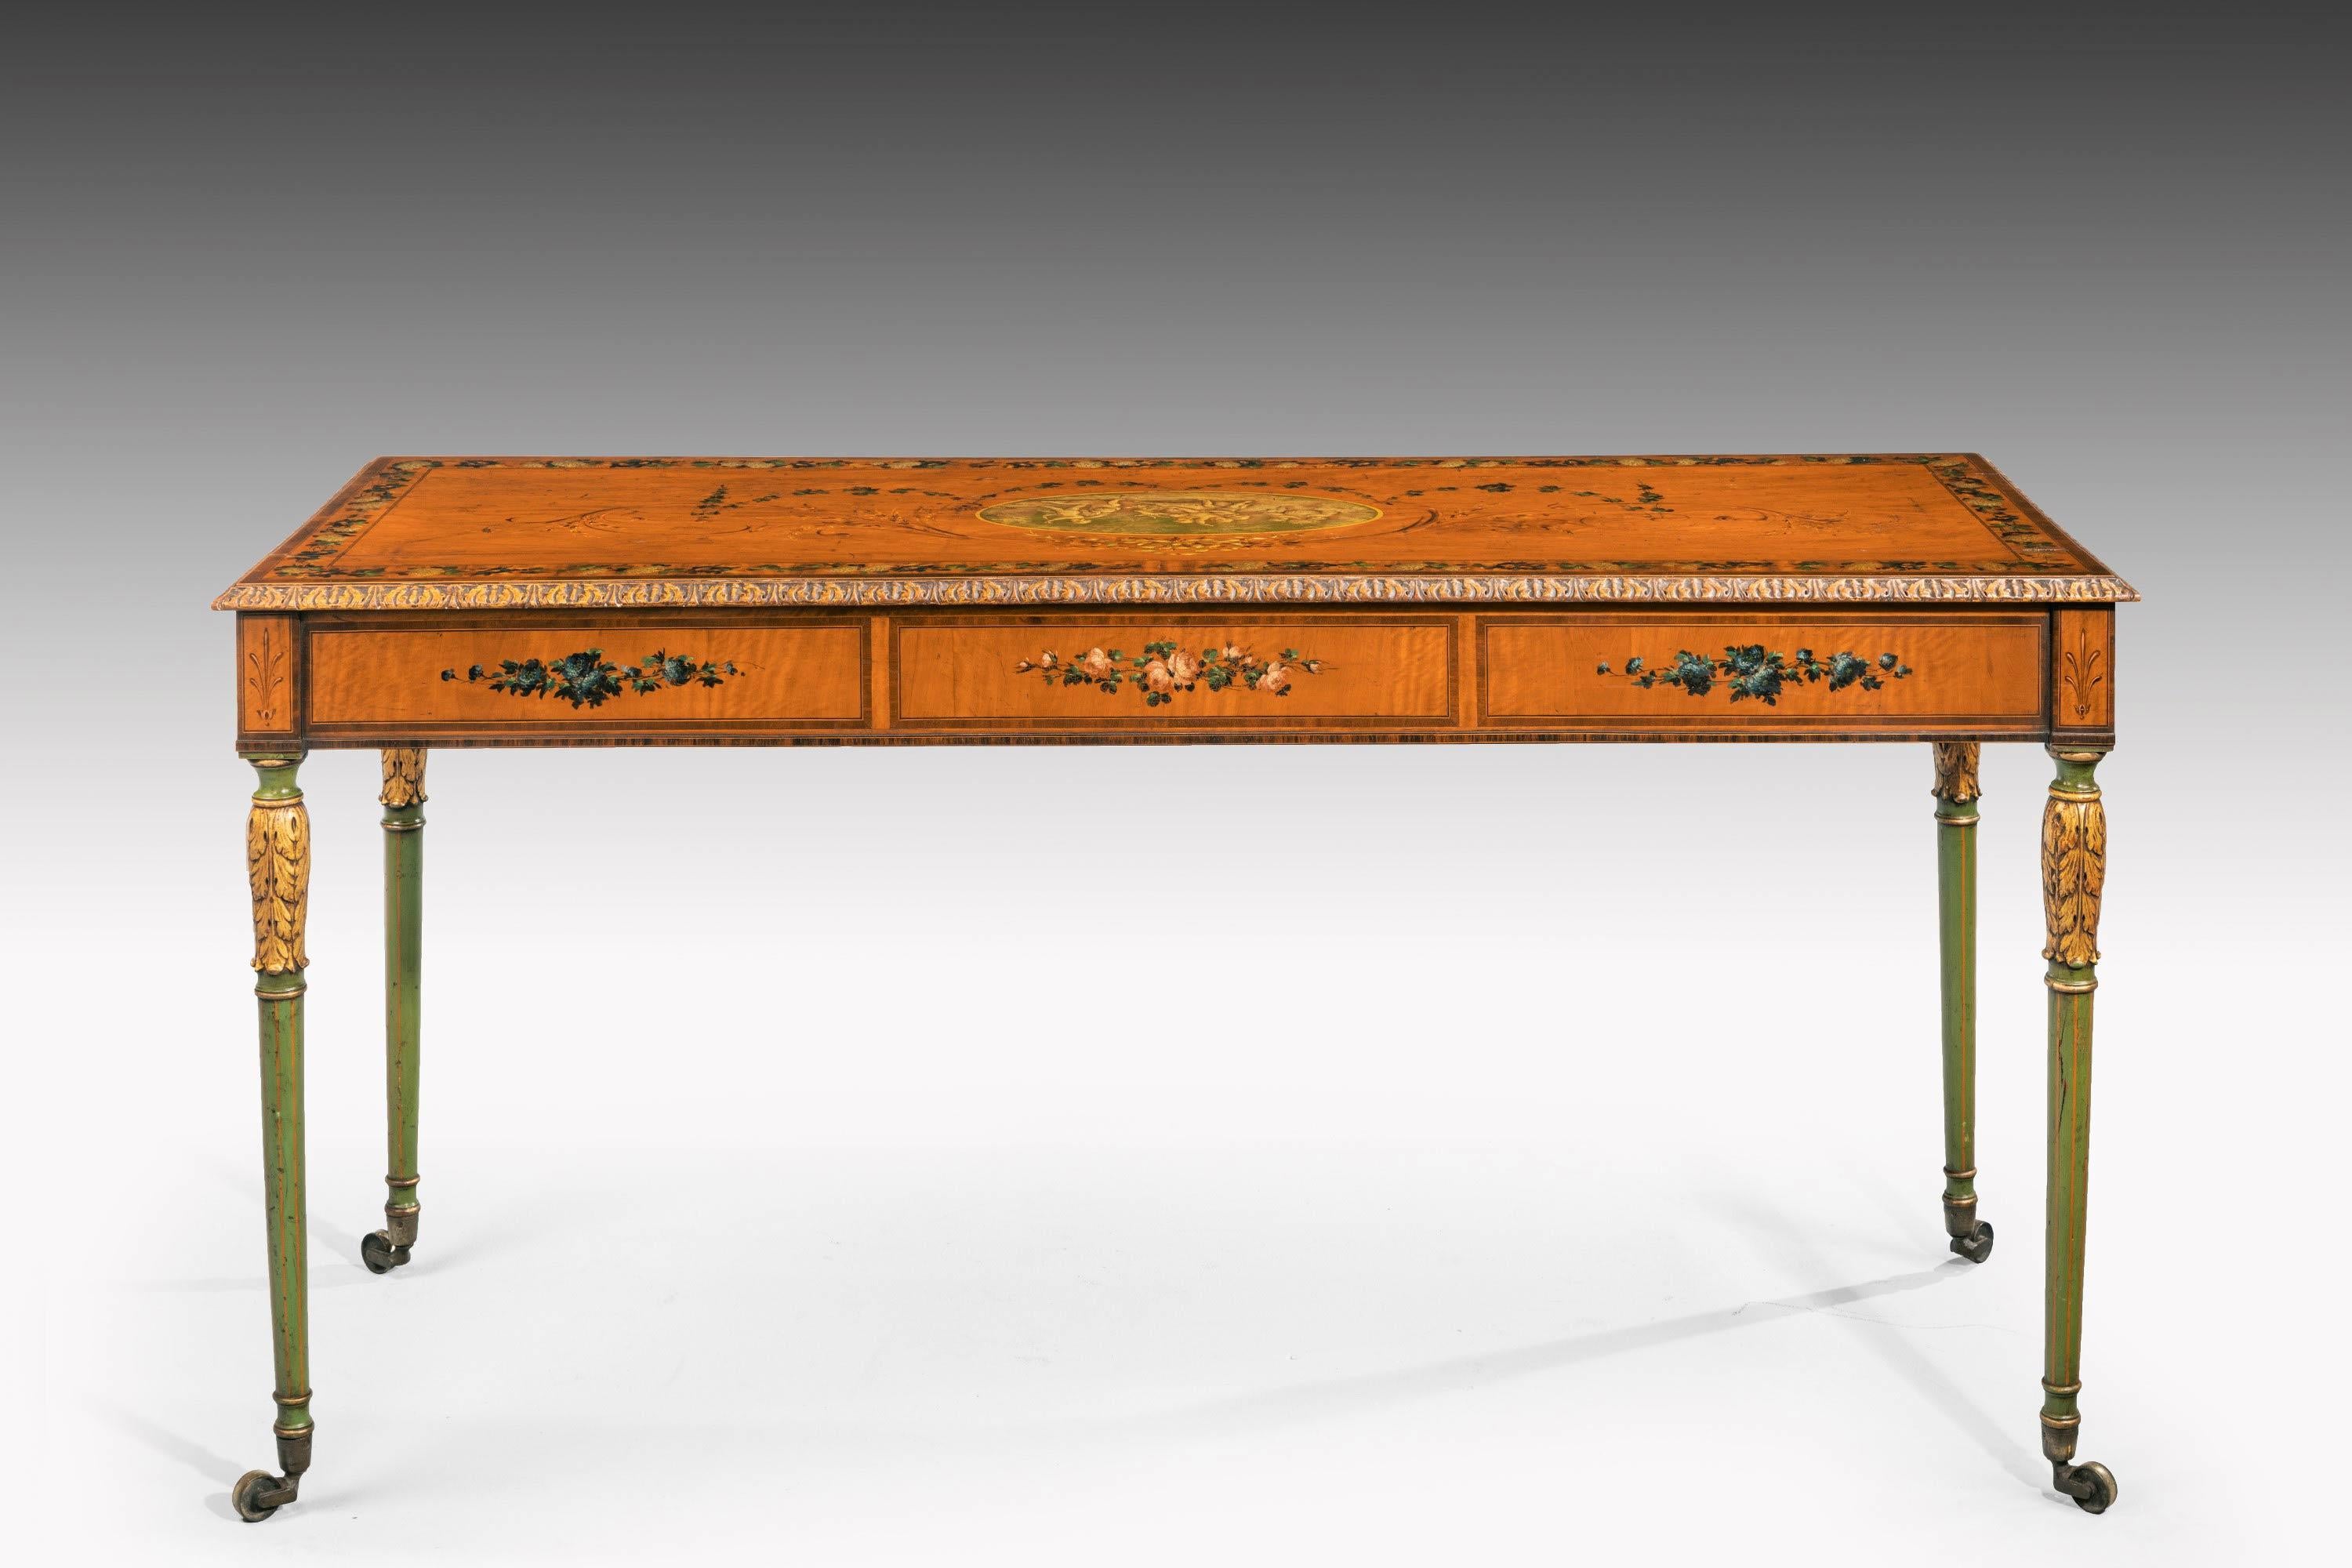 A most unusual 19th century slender, satinwood, centre standing table with finely painted and gilded decoration. The supports of a soft green hue, now well faded. Original shoes and castors and quite splendid side carrying handles.
     